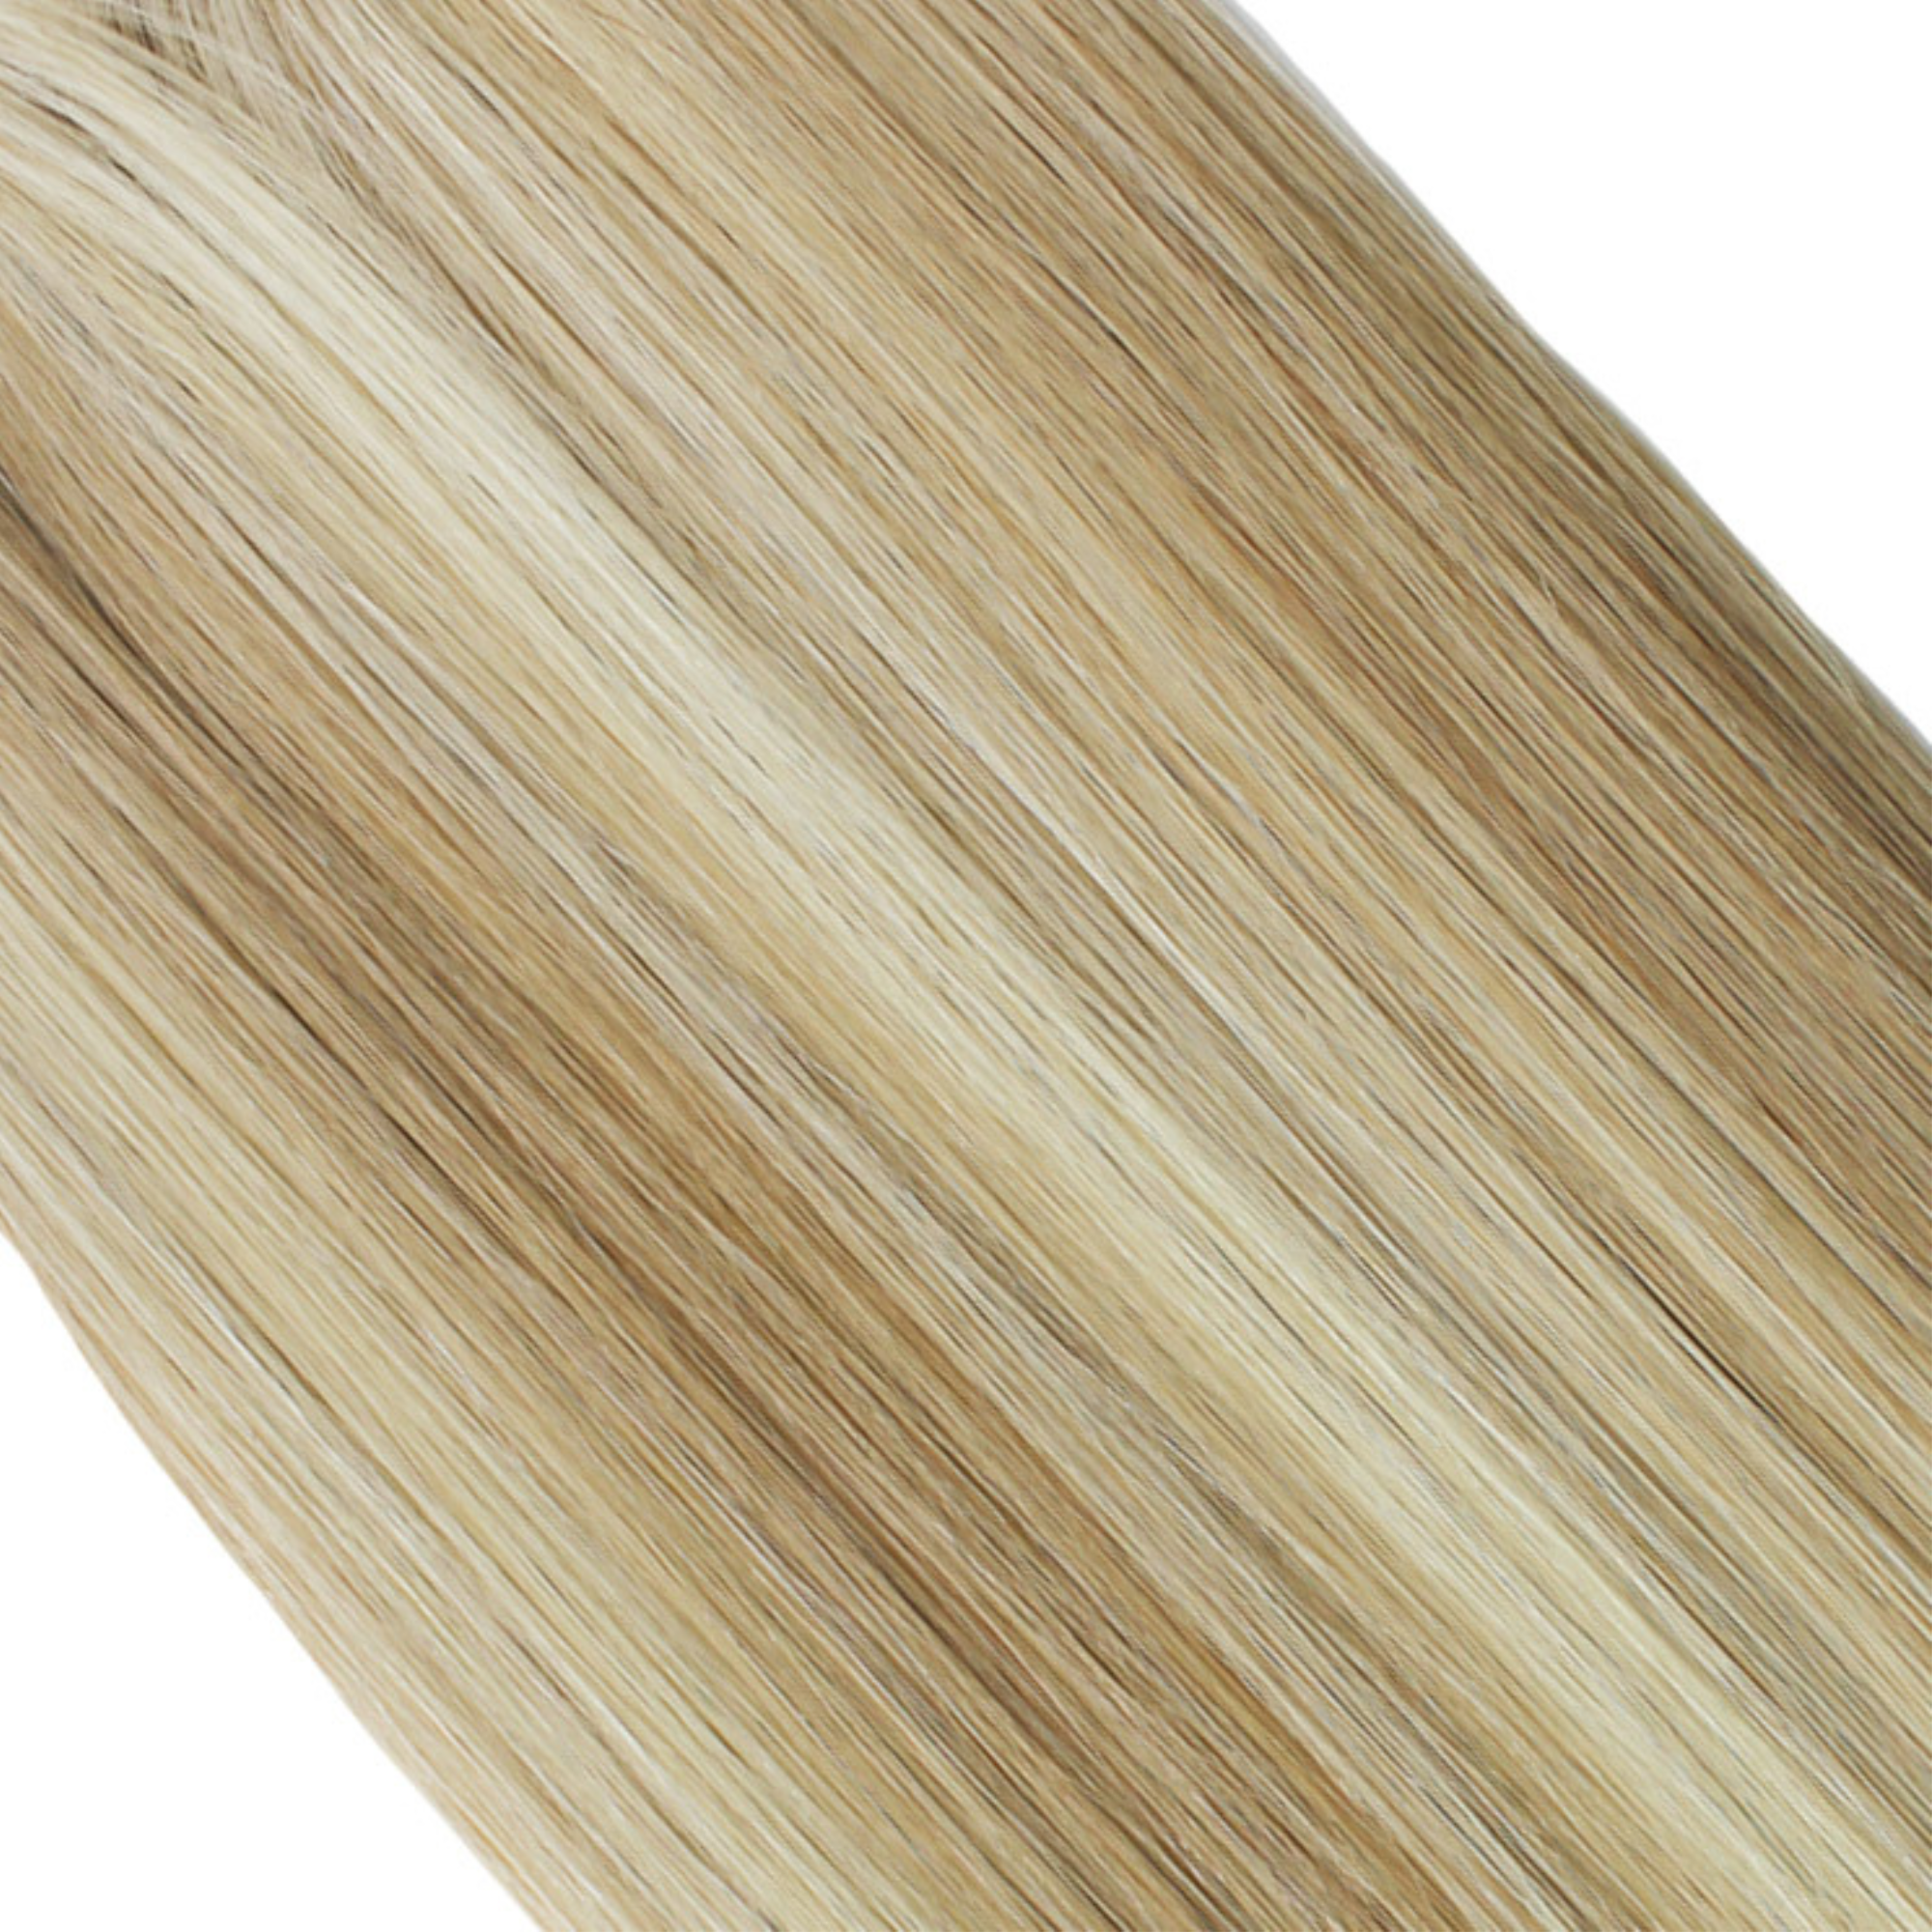 "hair rehab london 24" length 280 grams weight ultimate clip-in hair extensions shade titled coachella blonde"